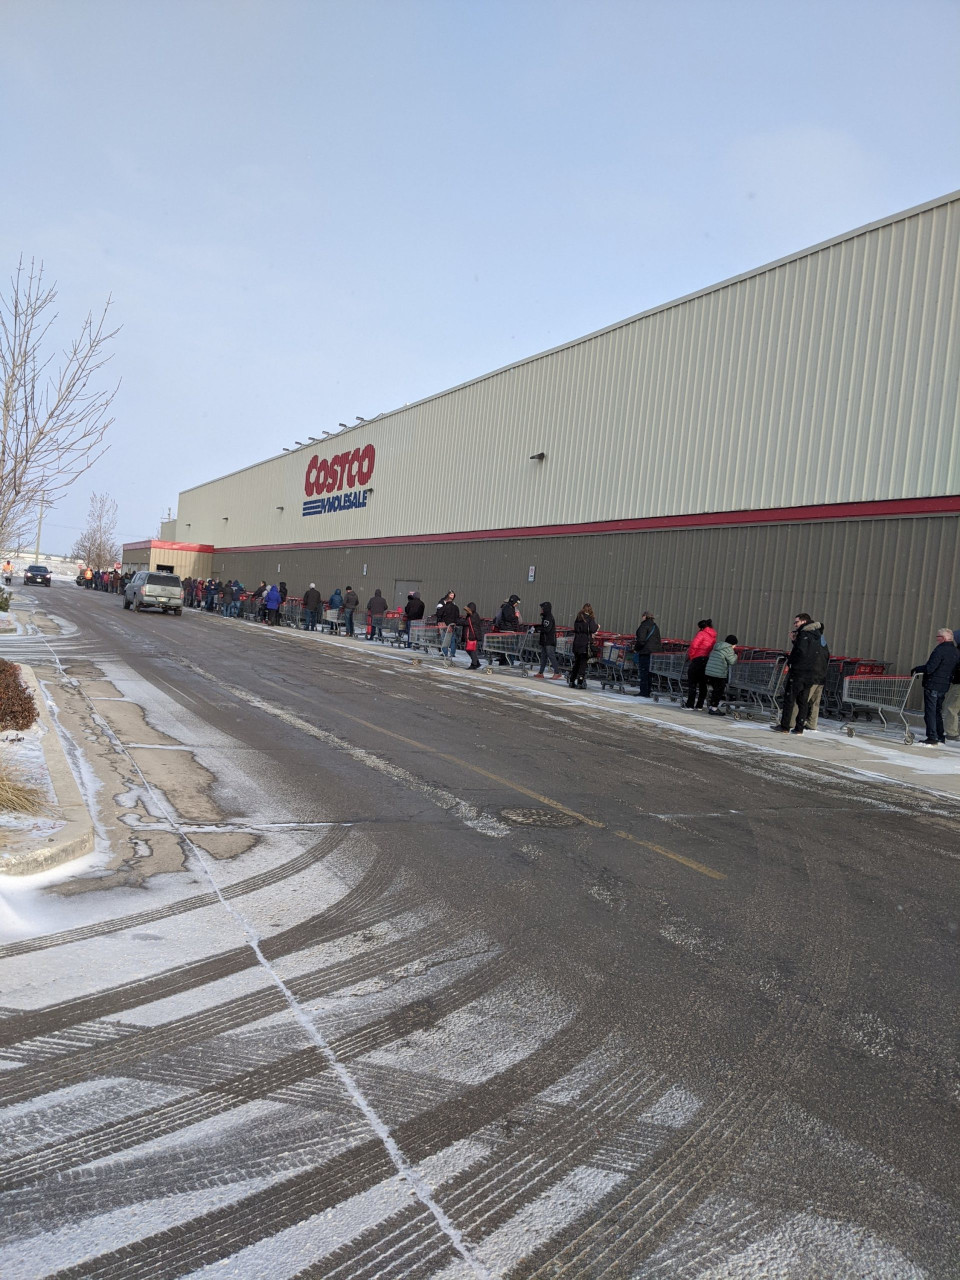 How to enter Costco passing the line